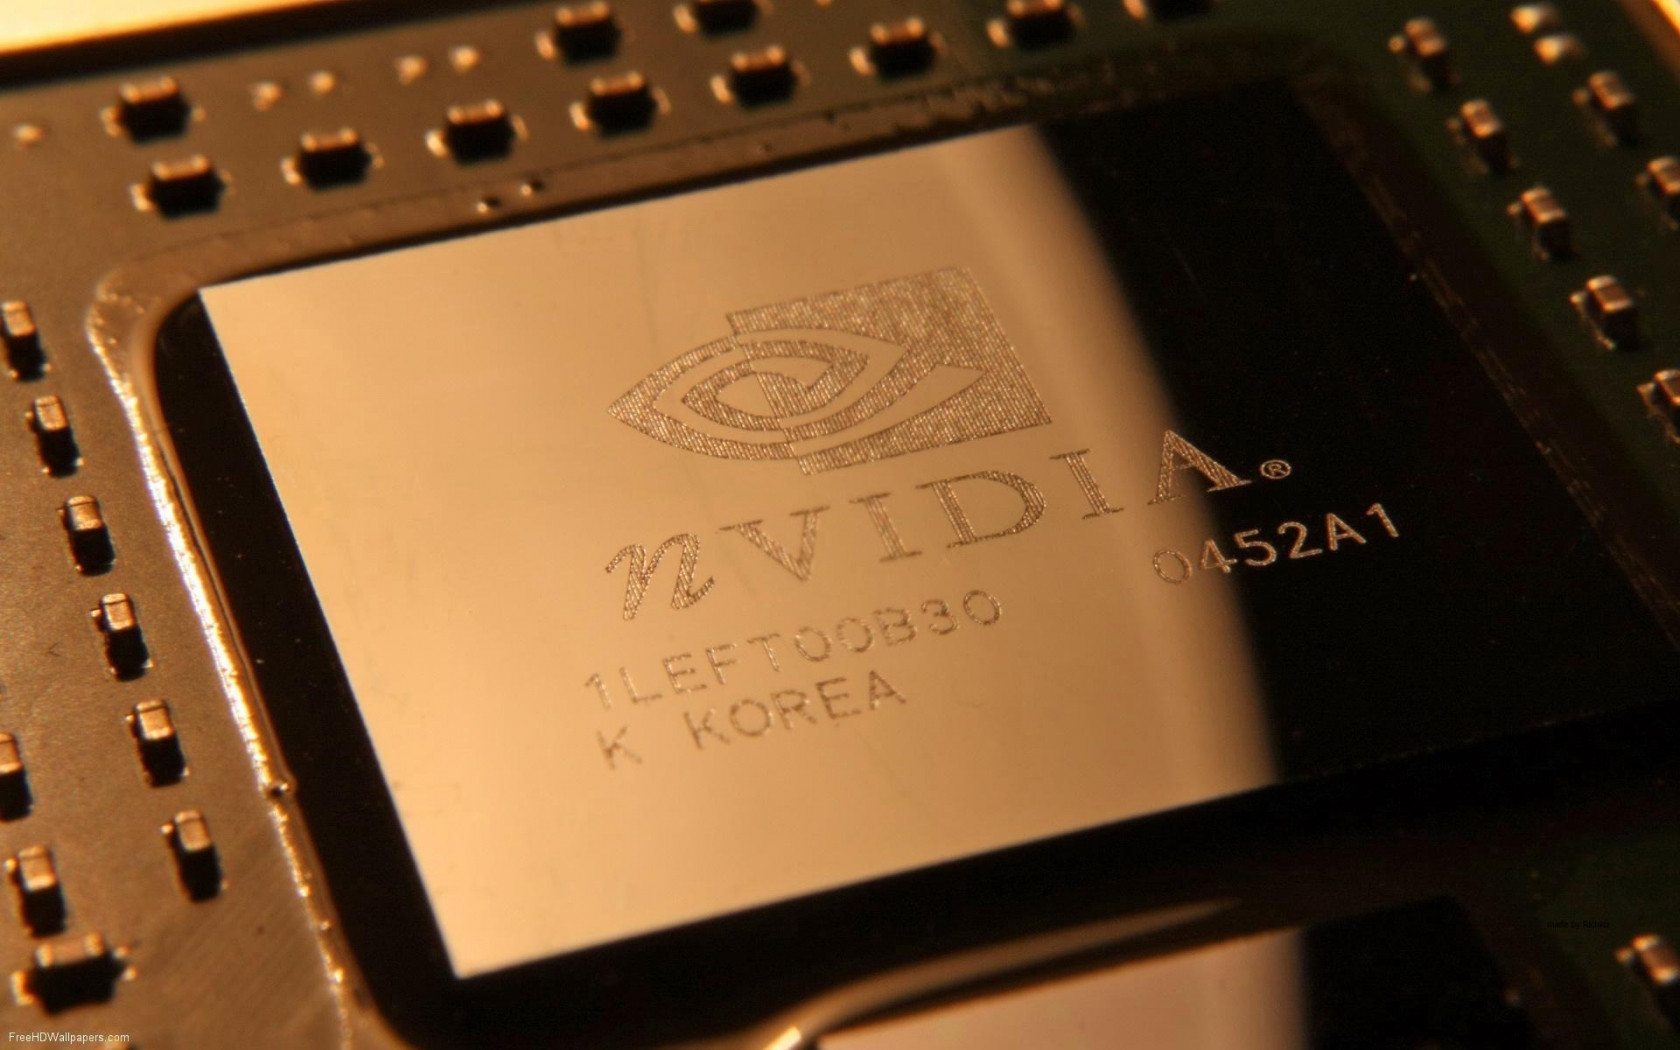 nVIdia Chipset for 1680 x 1050 widescreen resolution